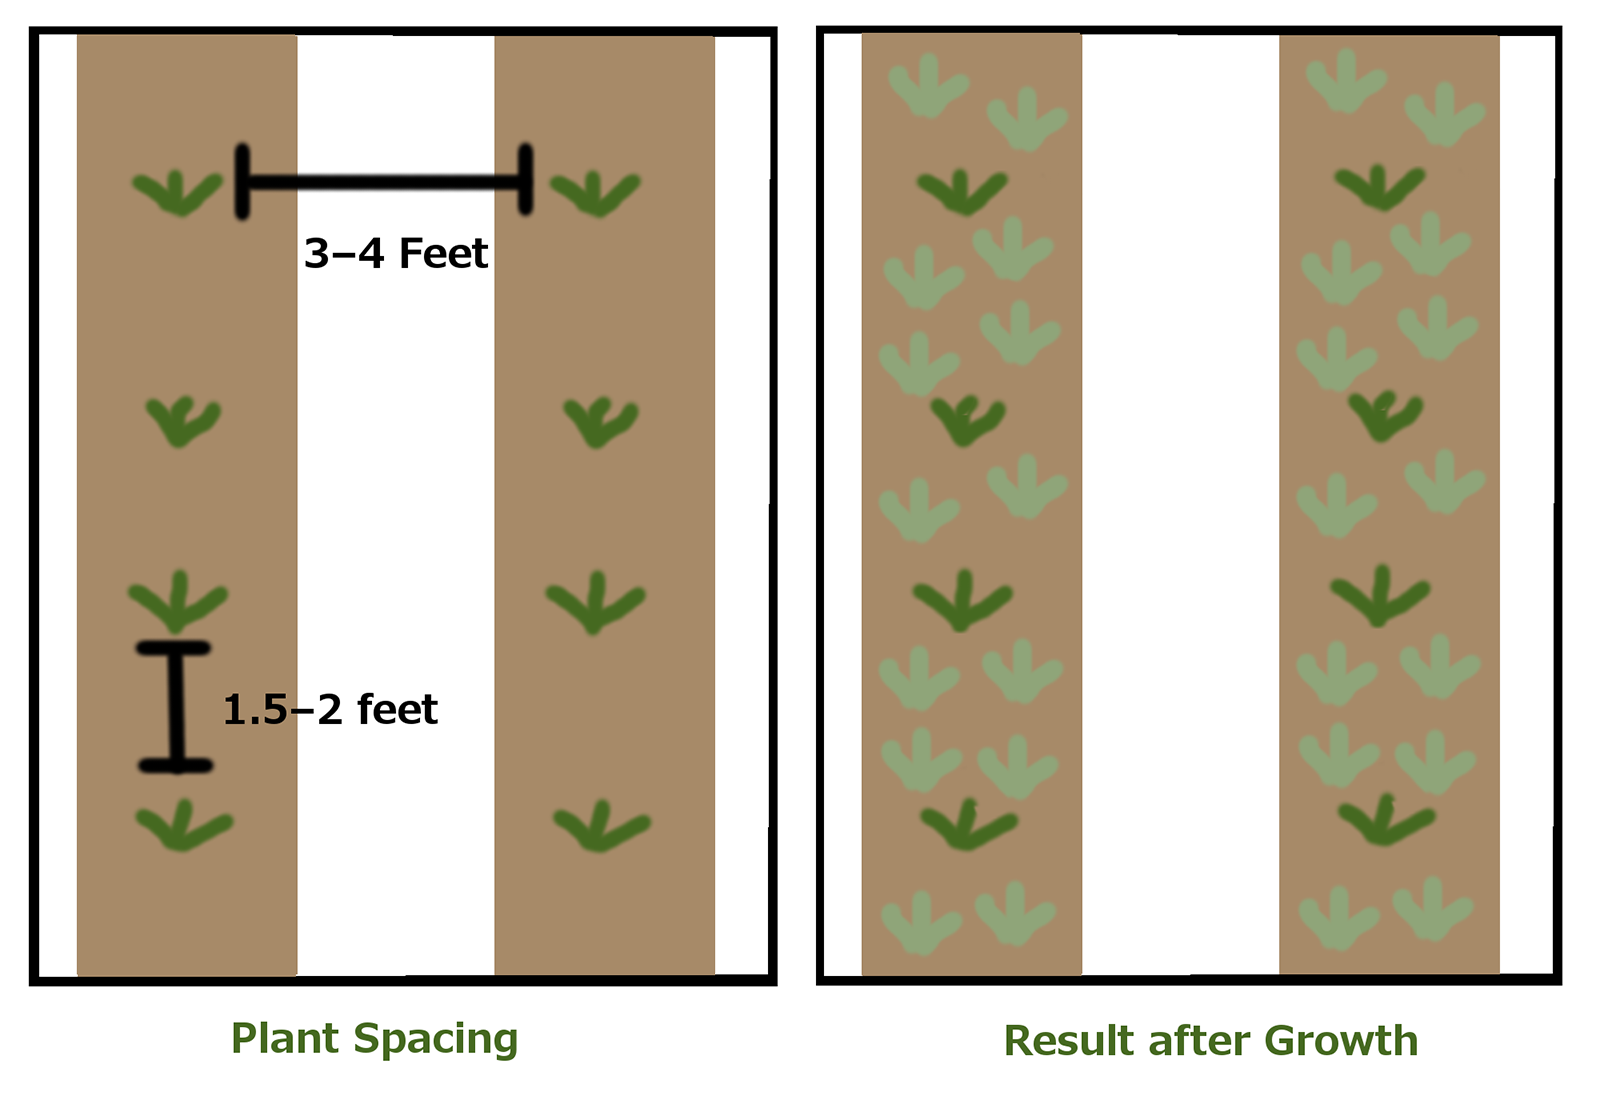 Planting diagram demonstrating the spacing at which to plant strawberries. The left side of the diagram is labeled "Plant Spacing" and text that indicates plant rows spaced 3 to 4 feet apart with plants in the row spaced 1.5 to 2 feet apart. The right side of the diagram is labeled "Result after Growth" and shows many plants filling in the two rows.